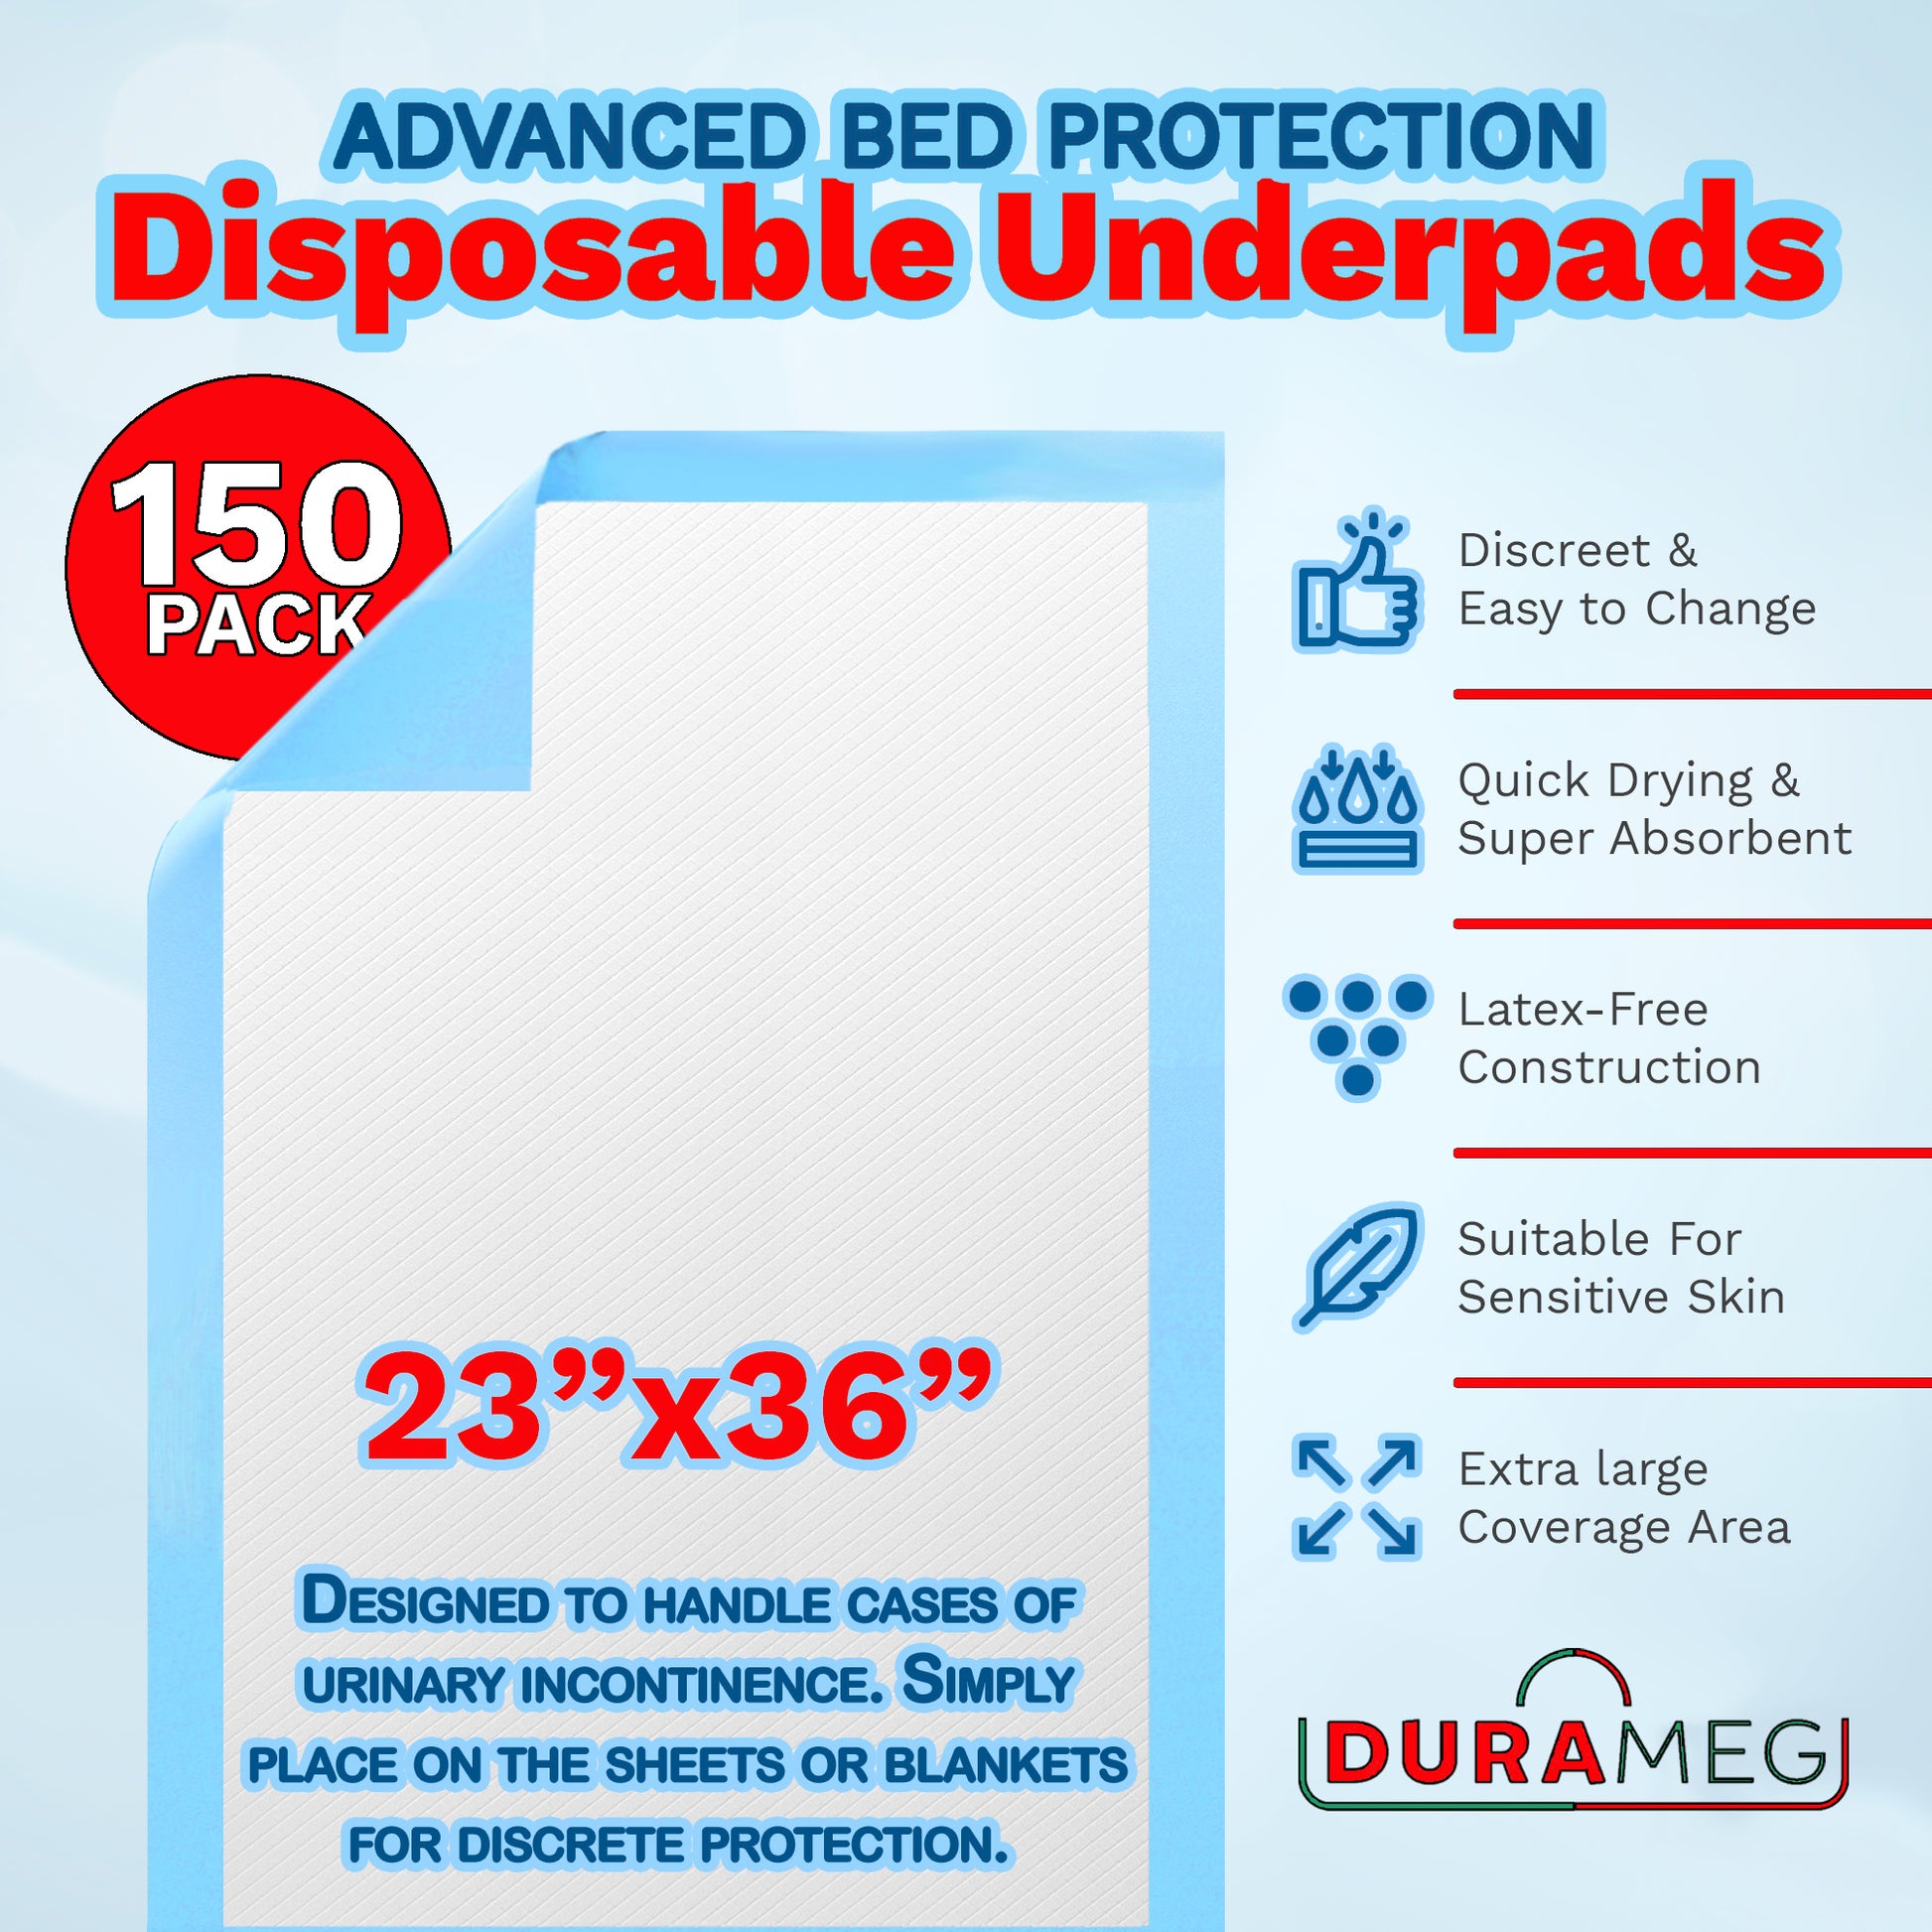 Advanced bed protection underpads